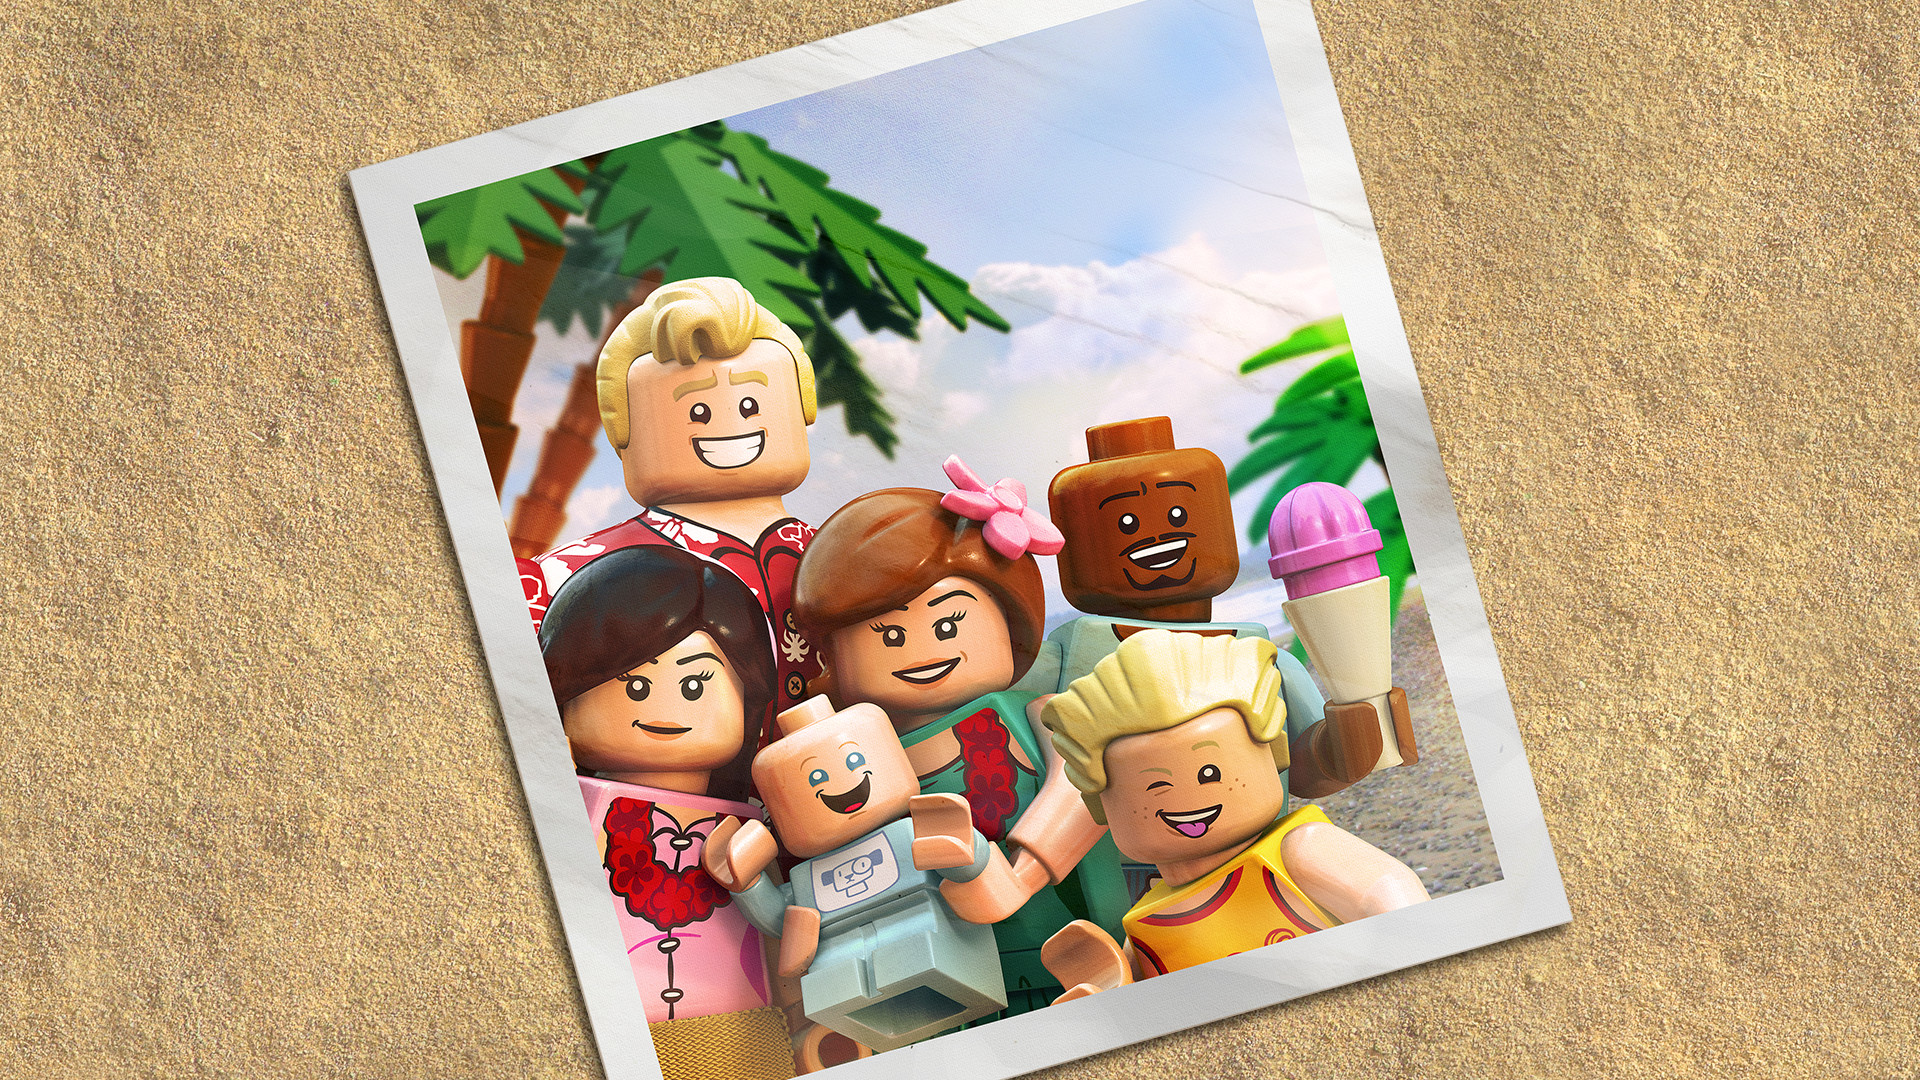 LEGO THE INCREDIBLES - Parr Family Vacation Character Pack DLC EU PS4 CD Key, $1.12